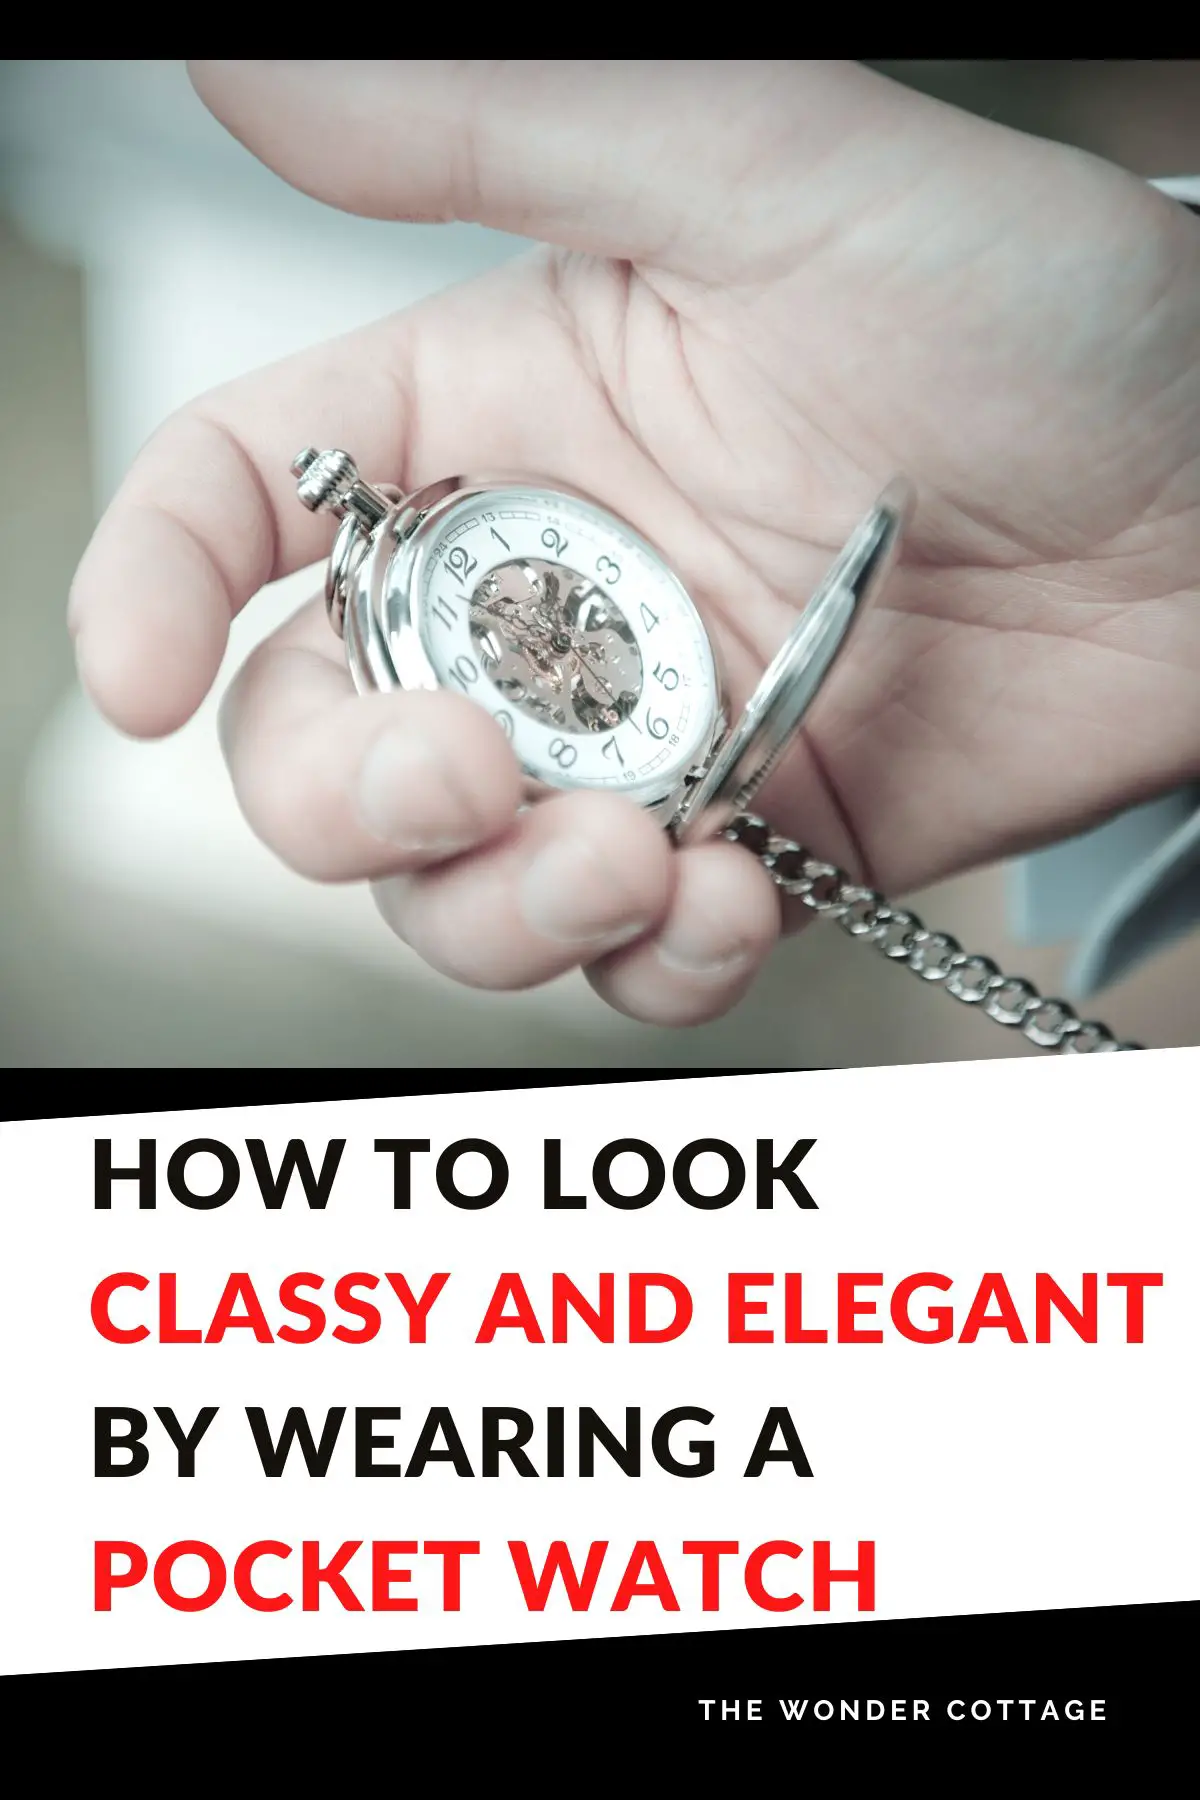 How To Look Classy And Elegant By Wearing A Pocket Watch